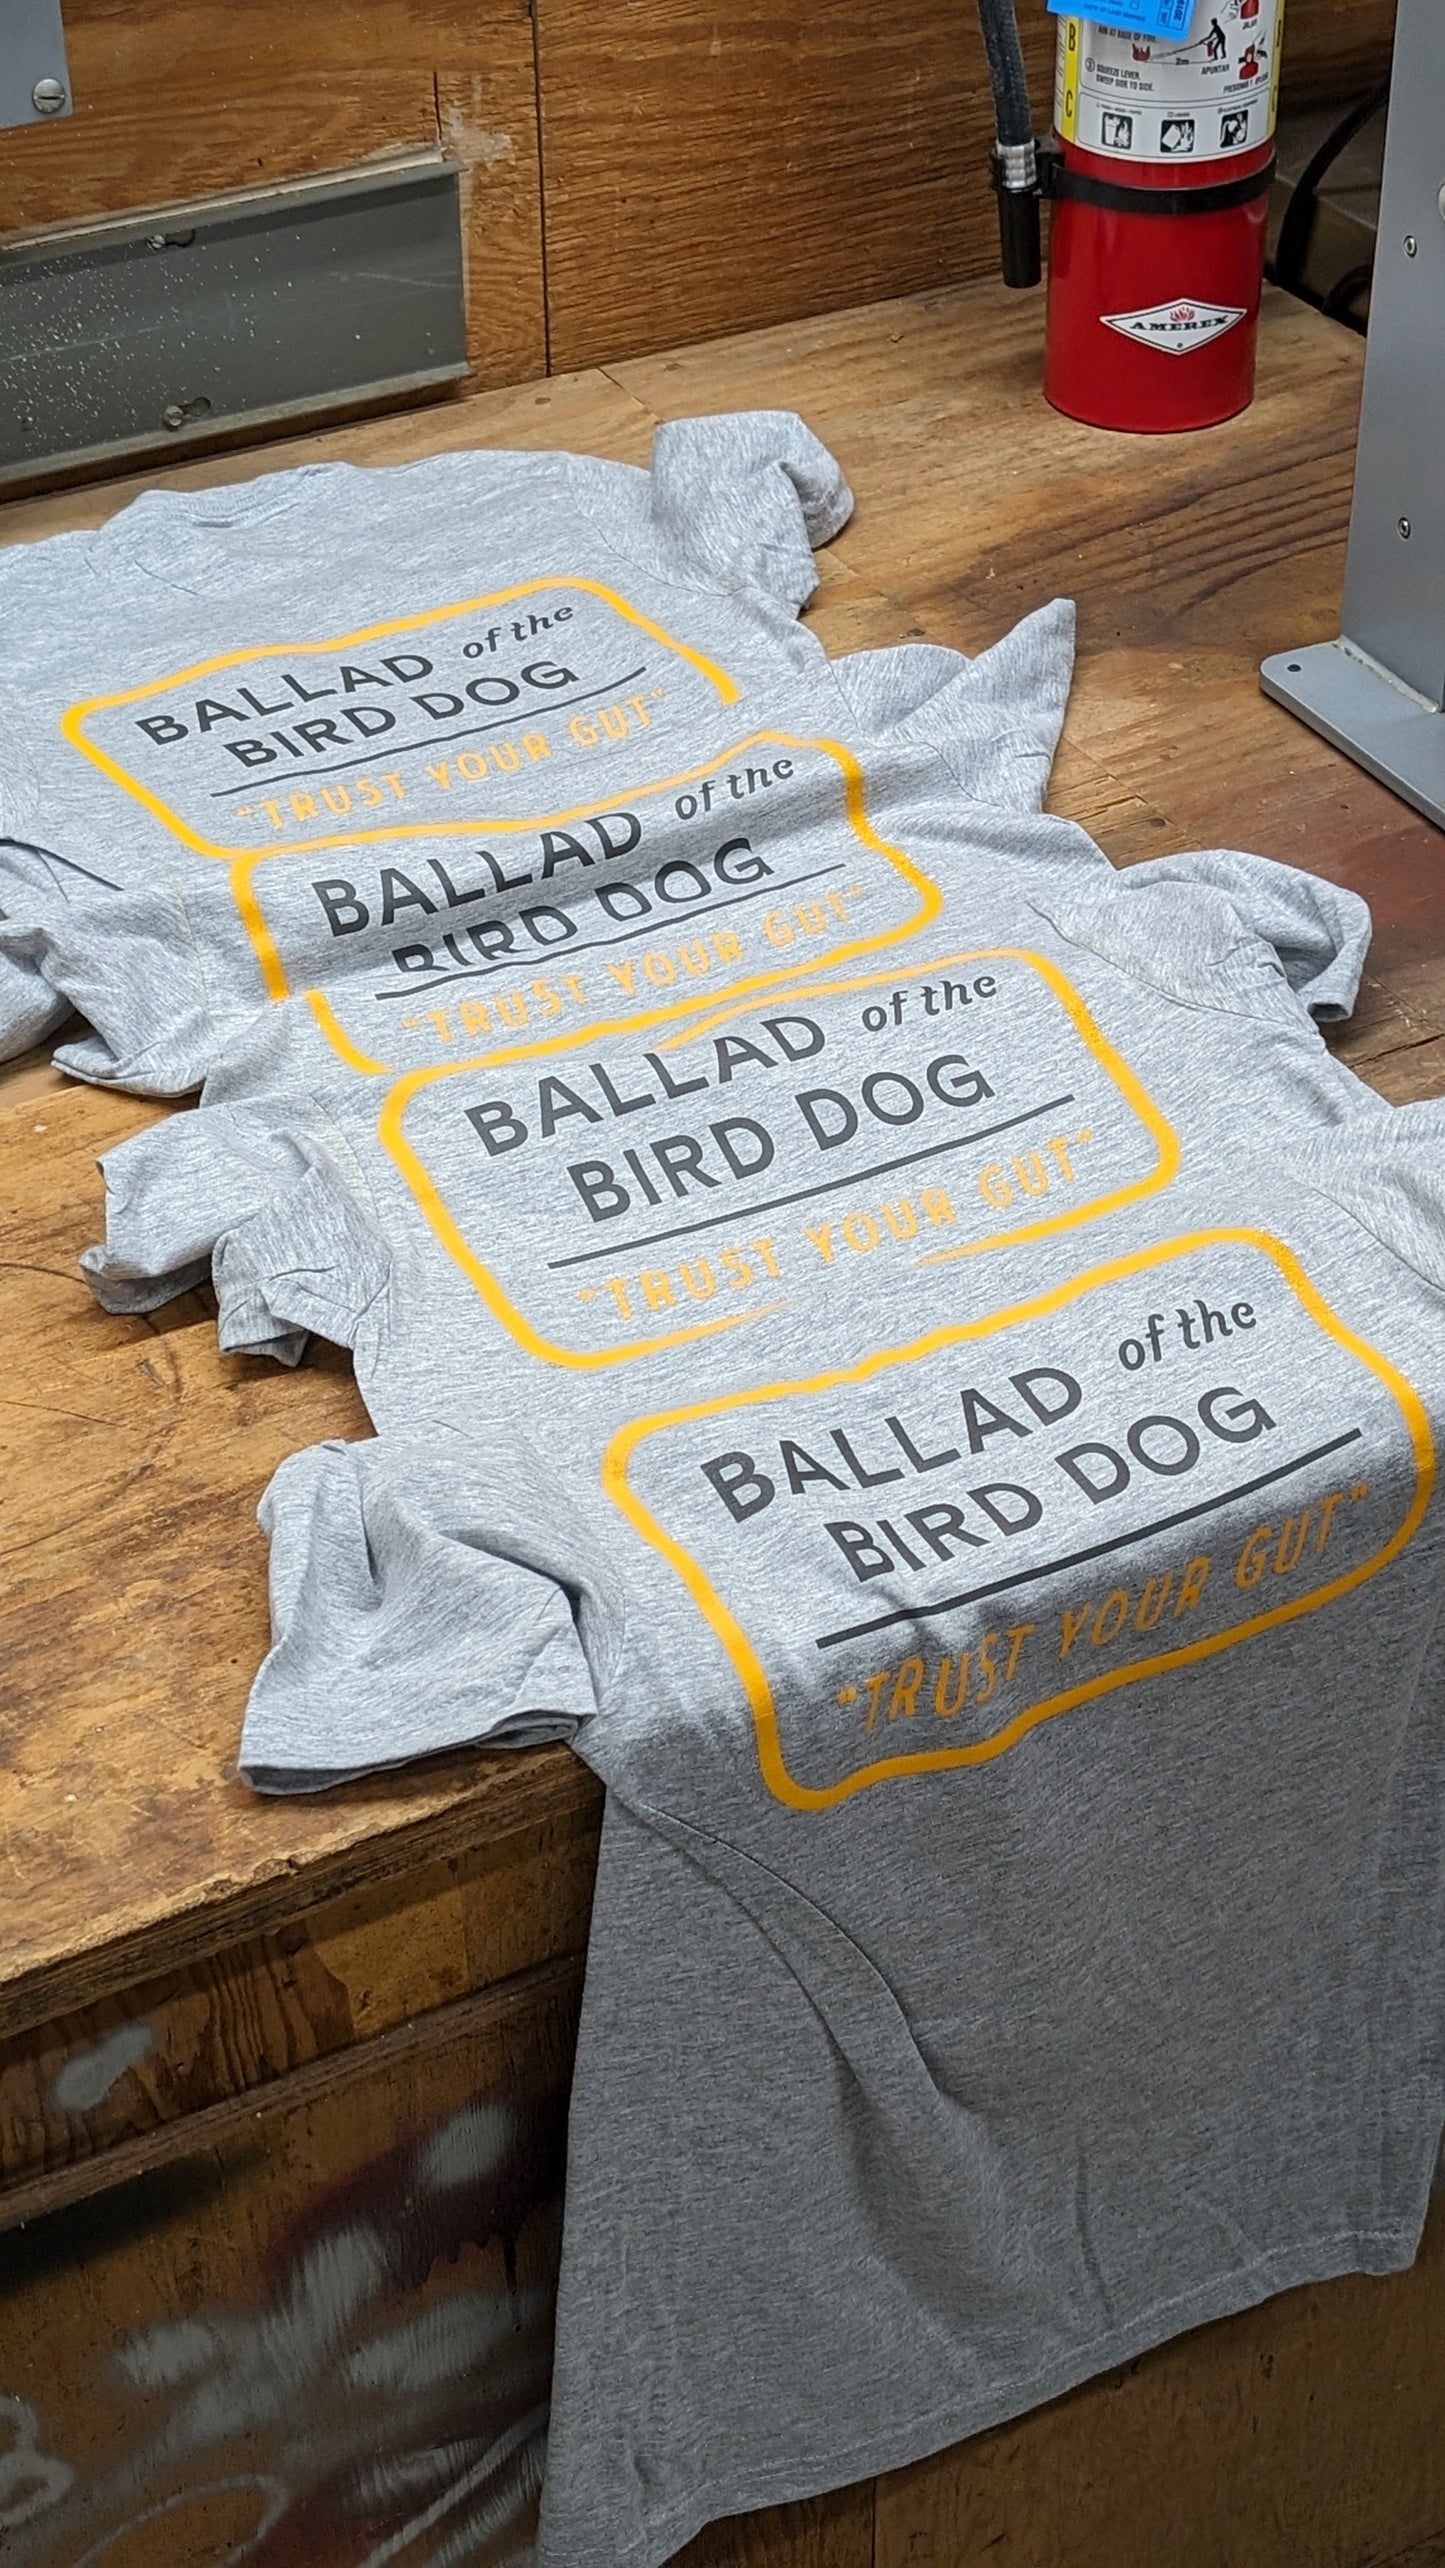 Vintage Slate T-shirts - The Bad Of The Bald And Bald Of The Bald - Ballad Of The Bird Dog